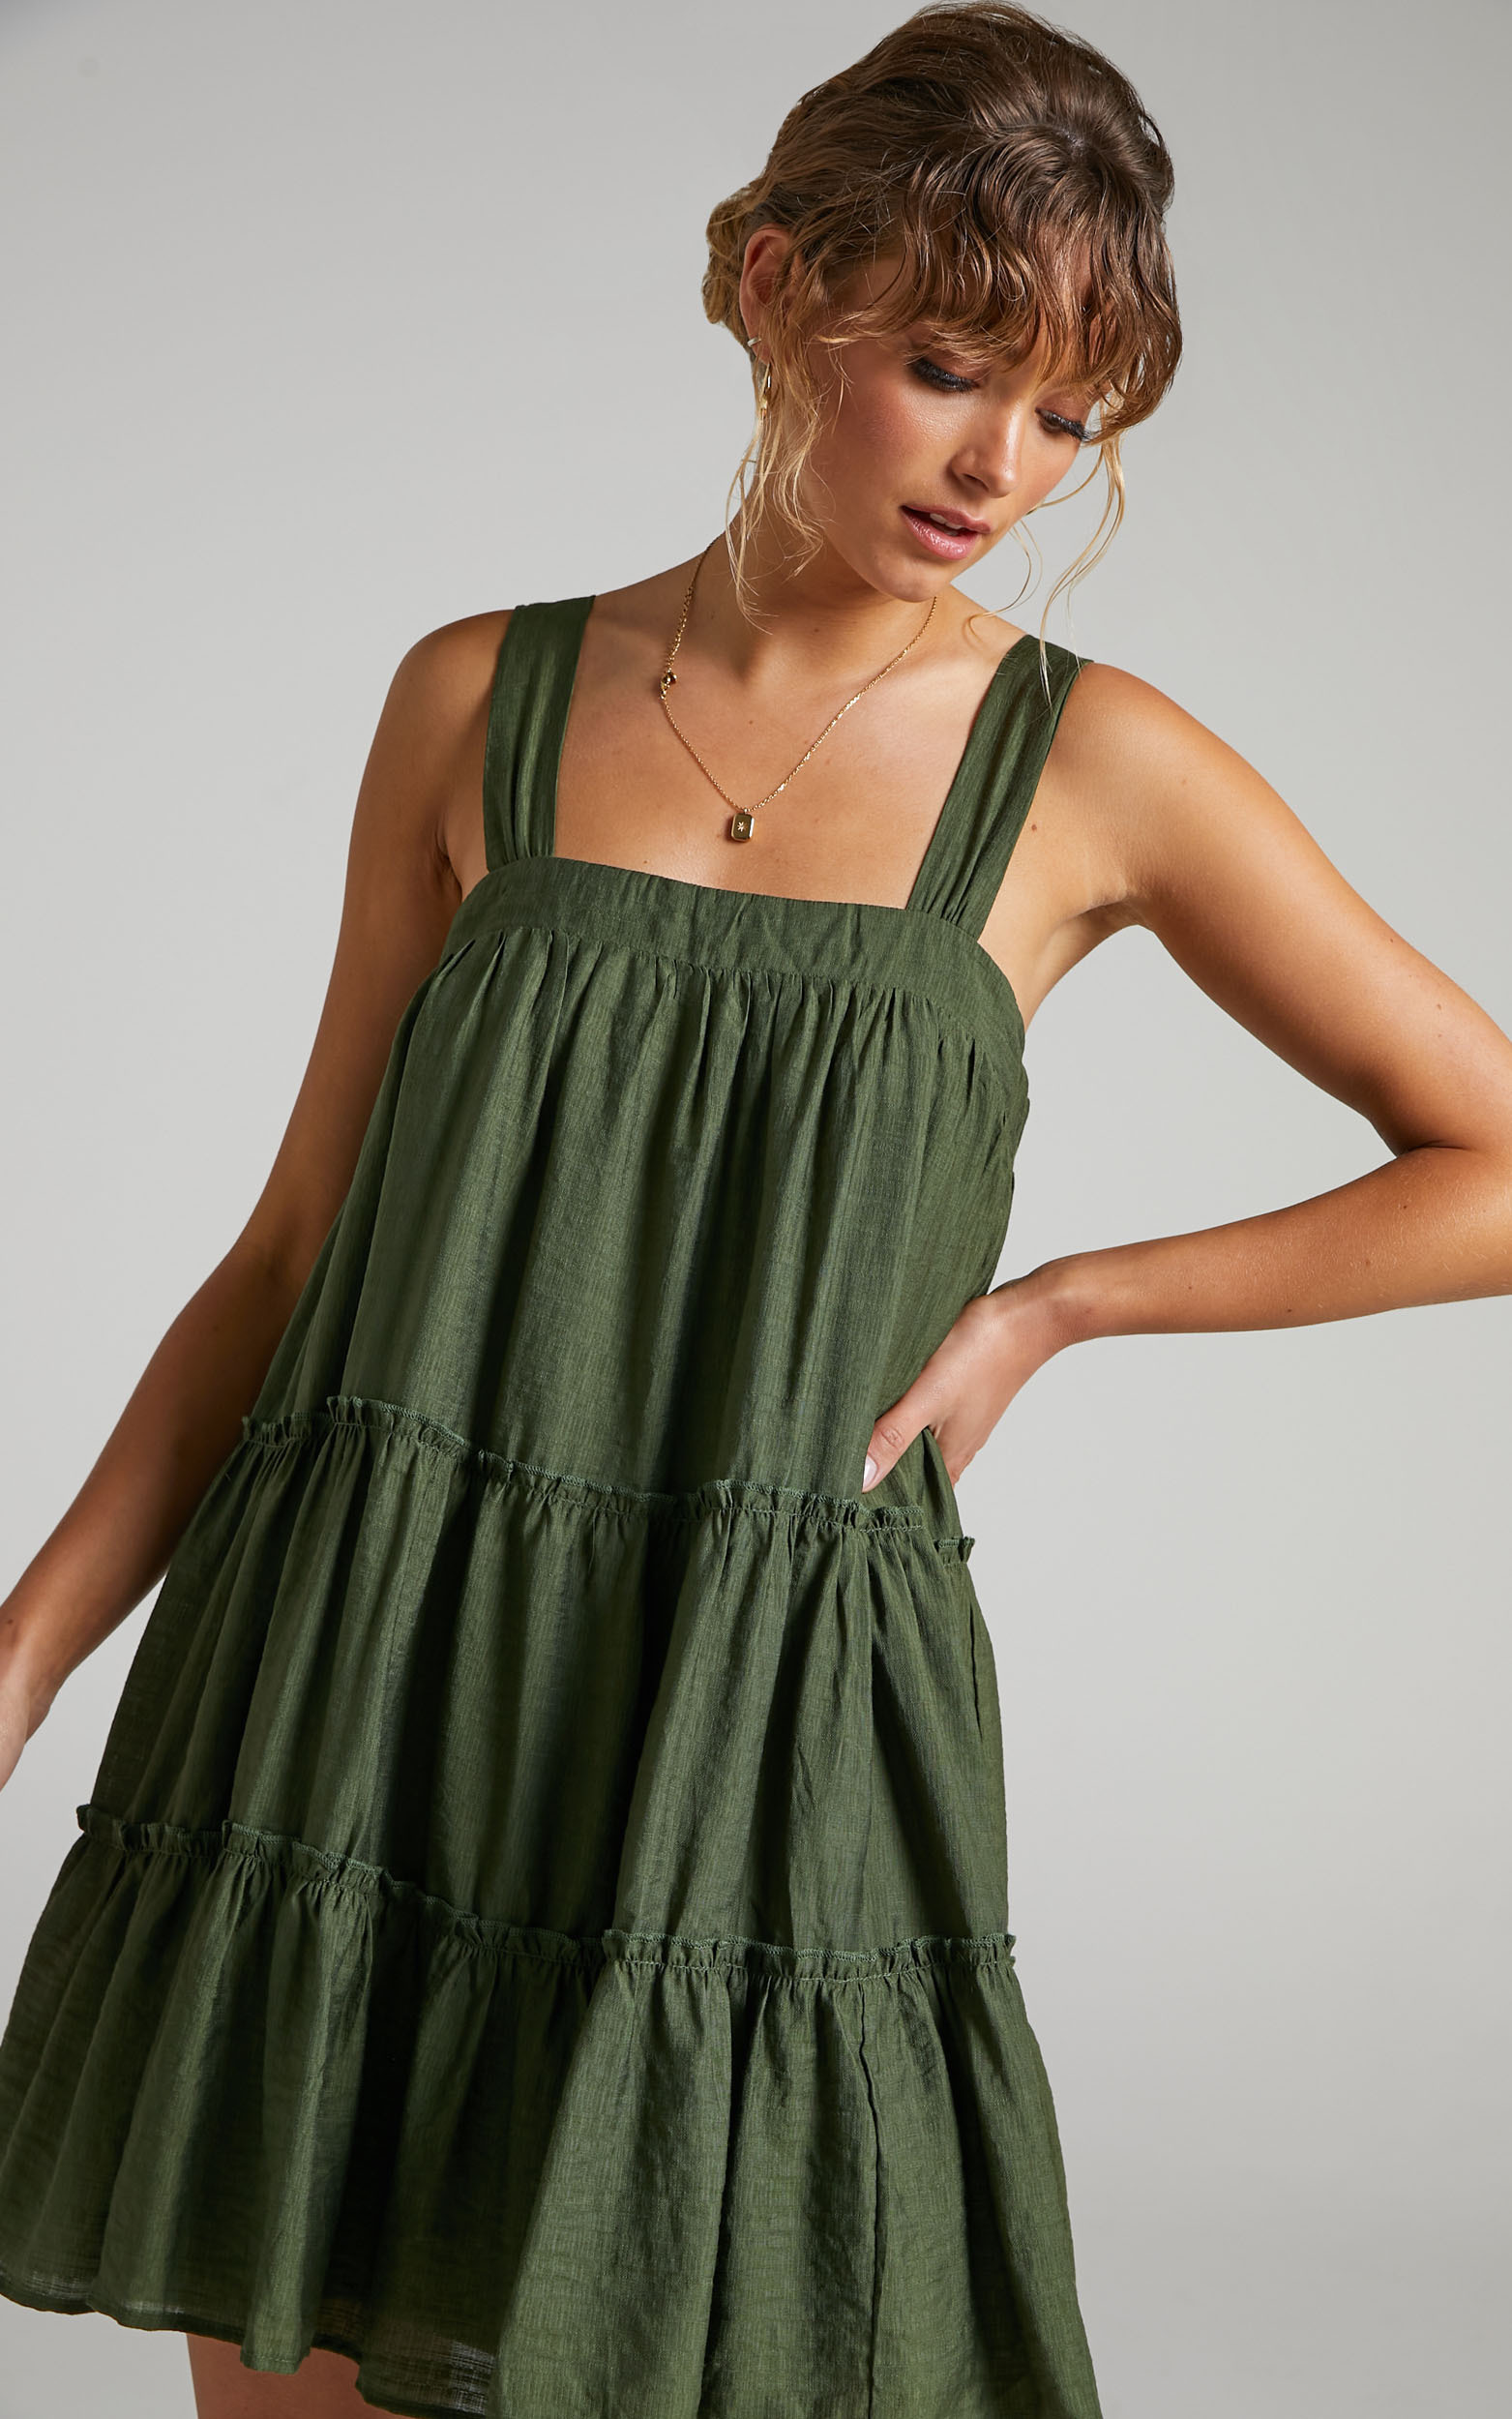 Brookie Tiered Mini Dress in Khaki - 06, GRN2, hi-res image number null